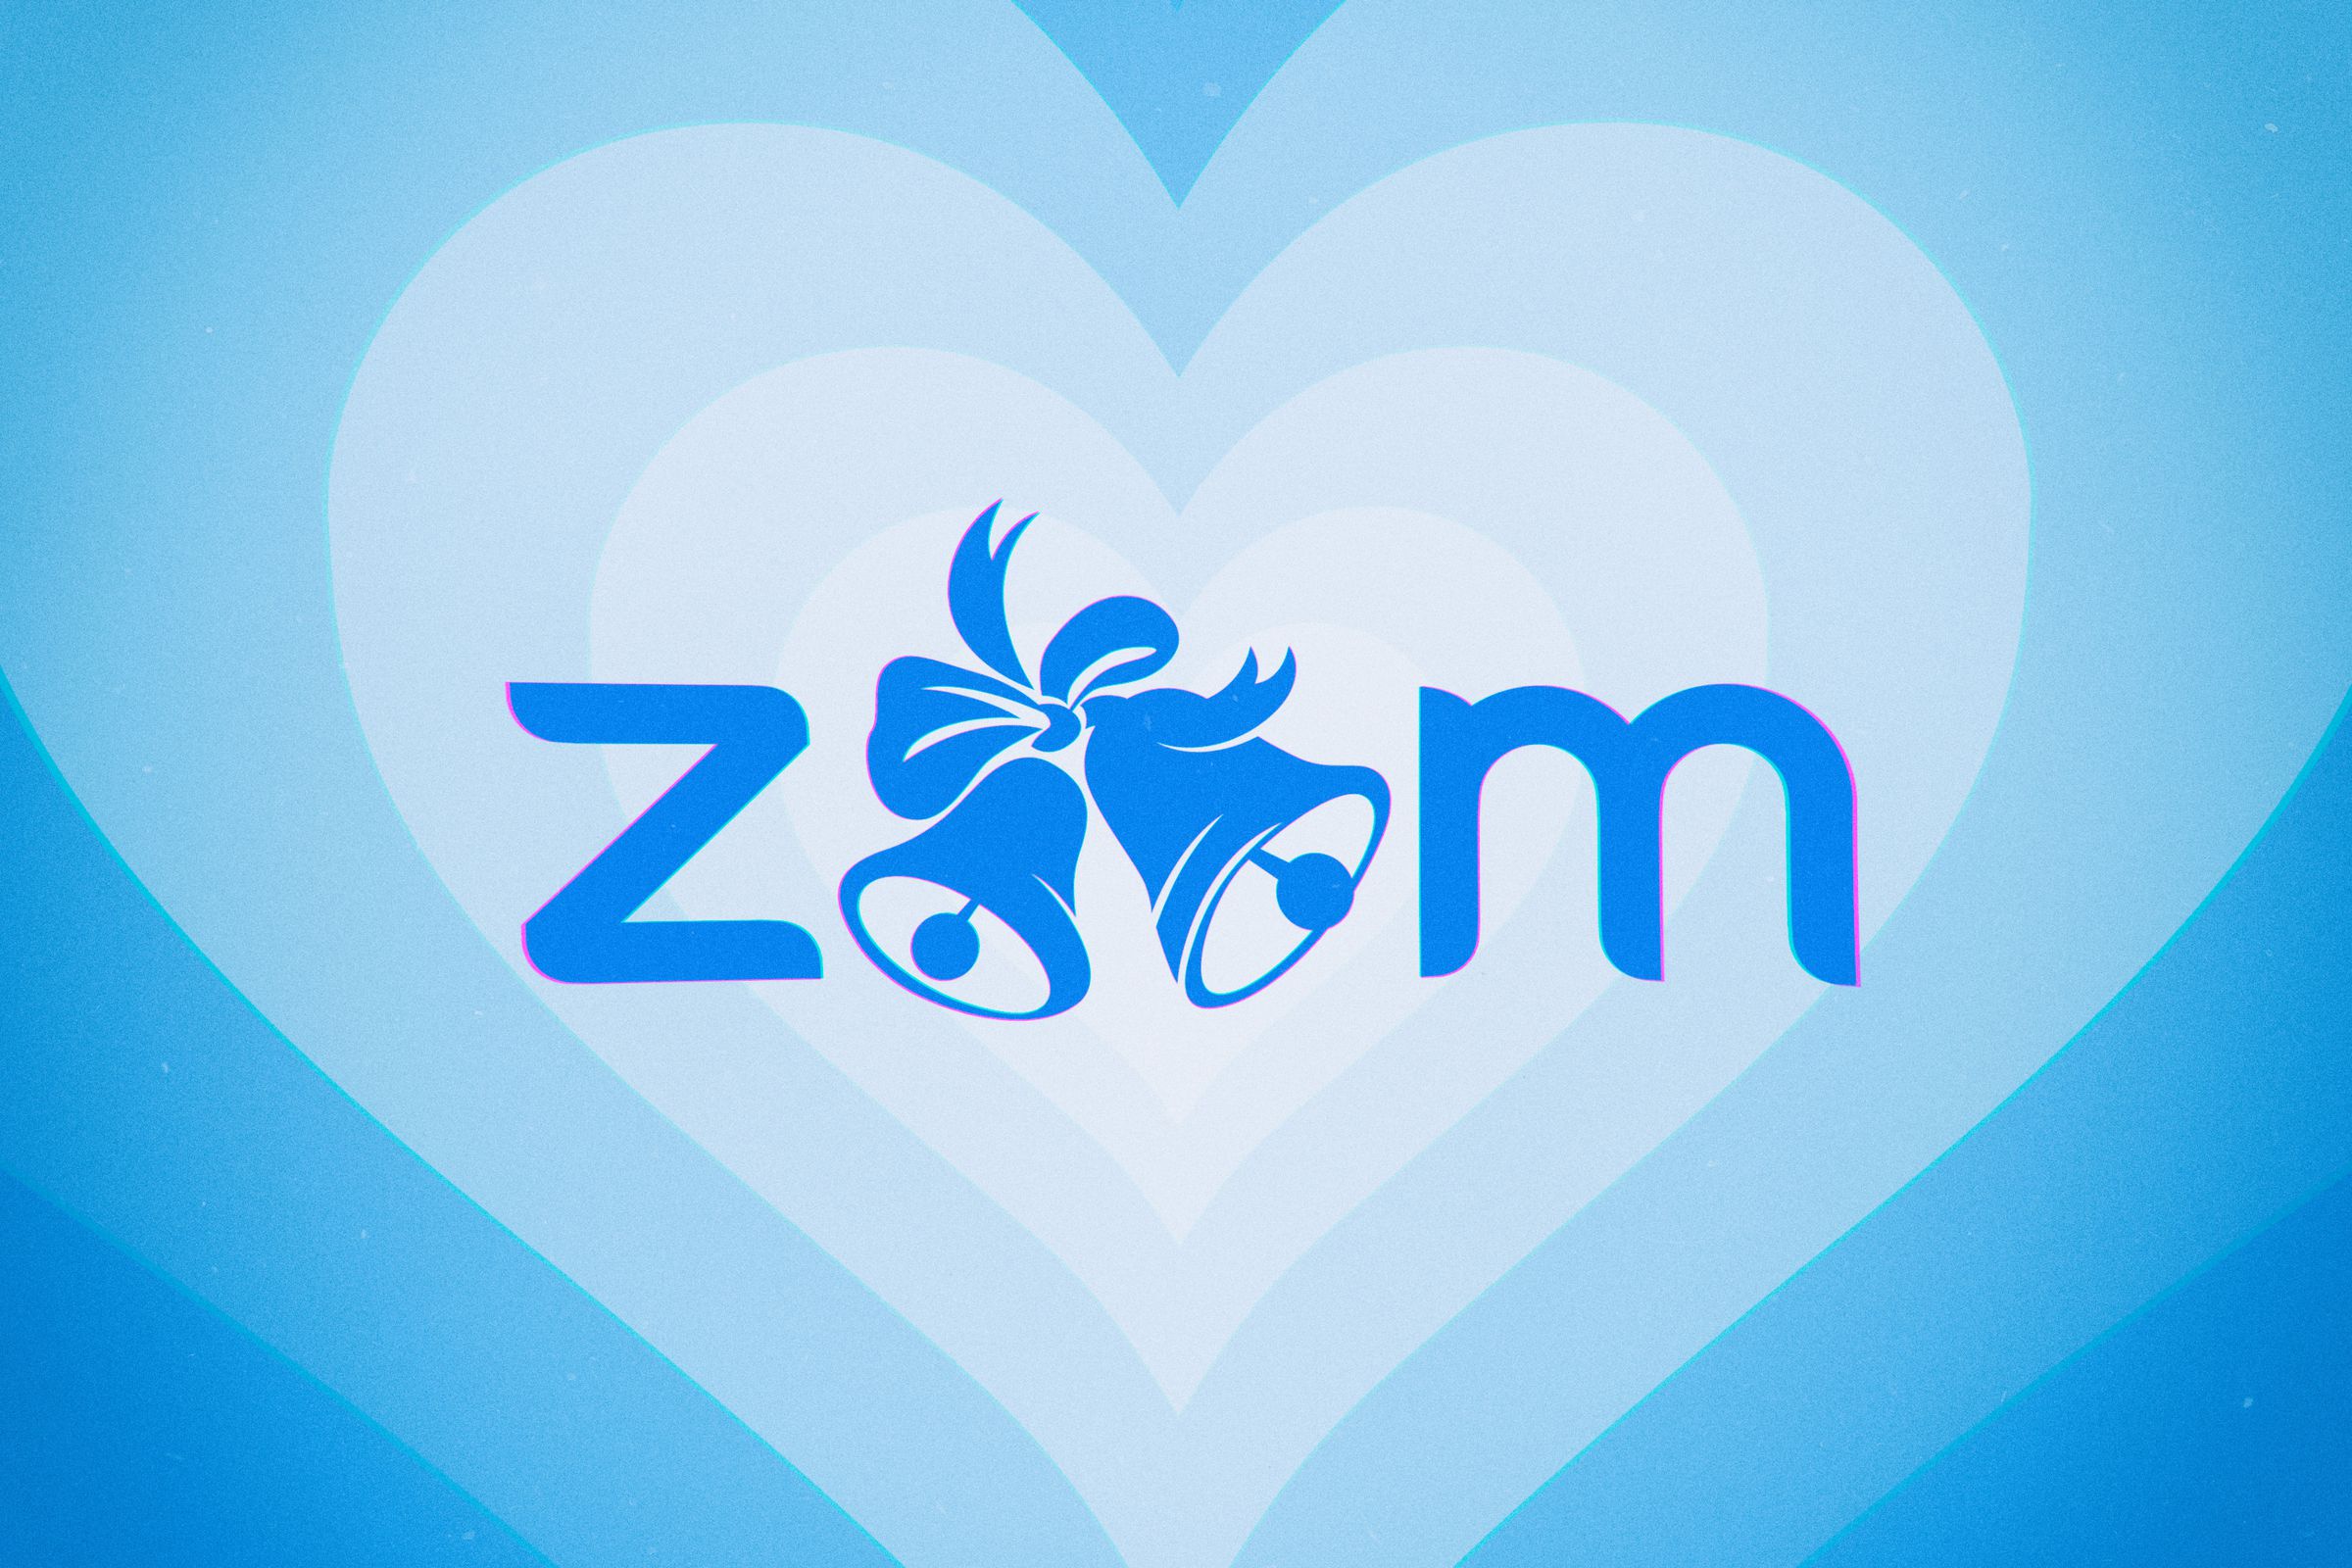 Zoom weddings soared during the pandemic